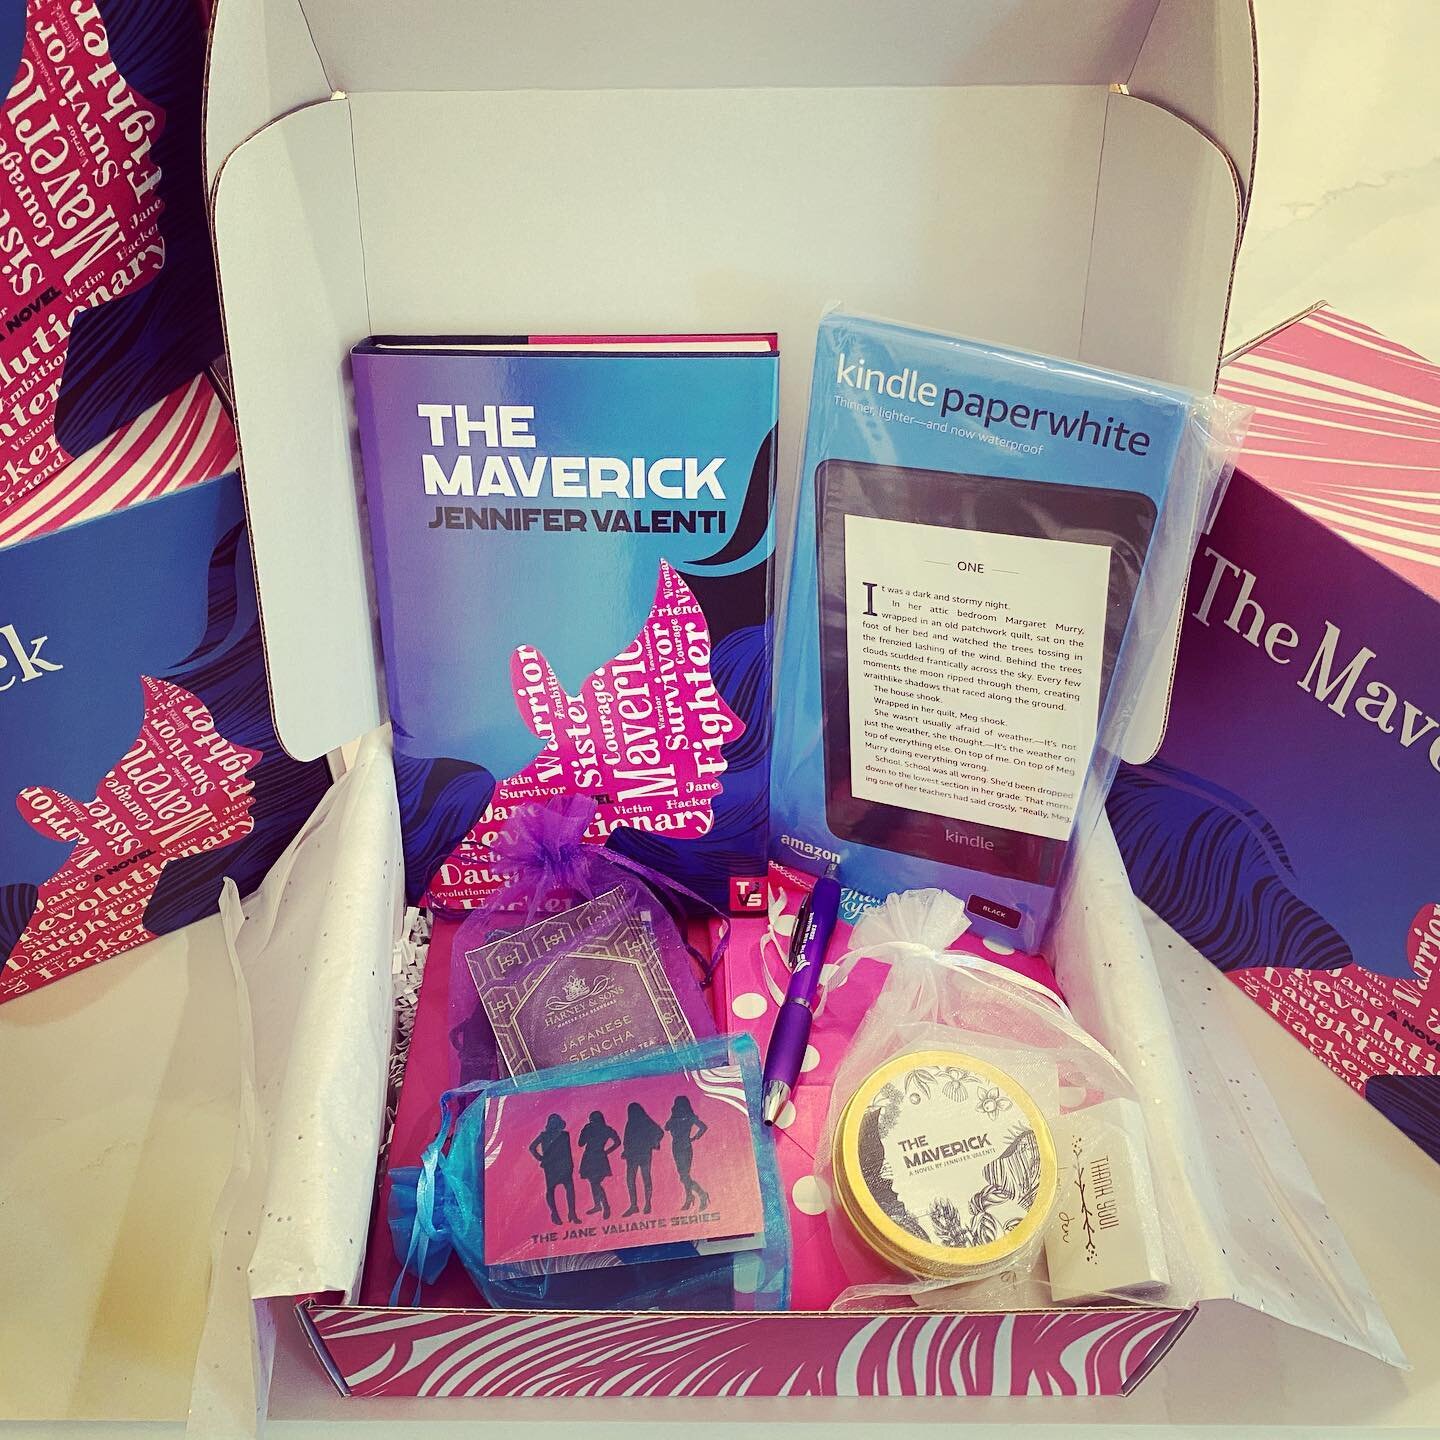 🚨🚨U.S. GIVEAWAY TIME🚨🚨

It&rsquo;s officially ONE WEEK from publication day for The Maverick, so in honor of all the amazing support I&rsquo;ve received, I&rsquo;m giving away  a PR Box chock full of amazing giveaways to FOUR lucky U.S. winners. 